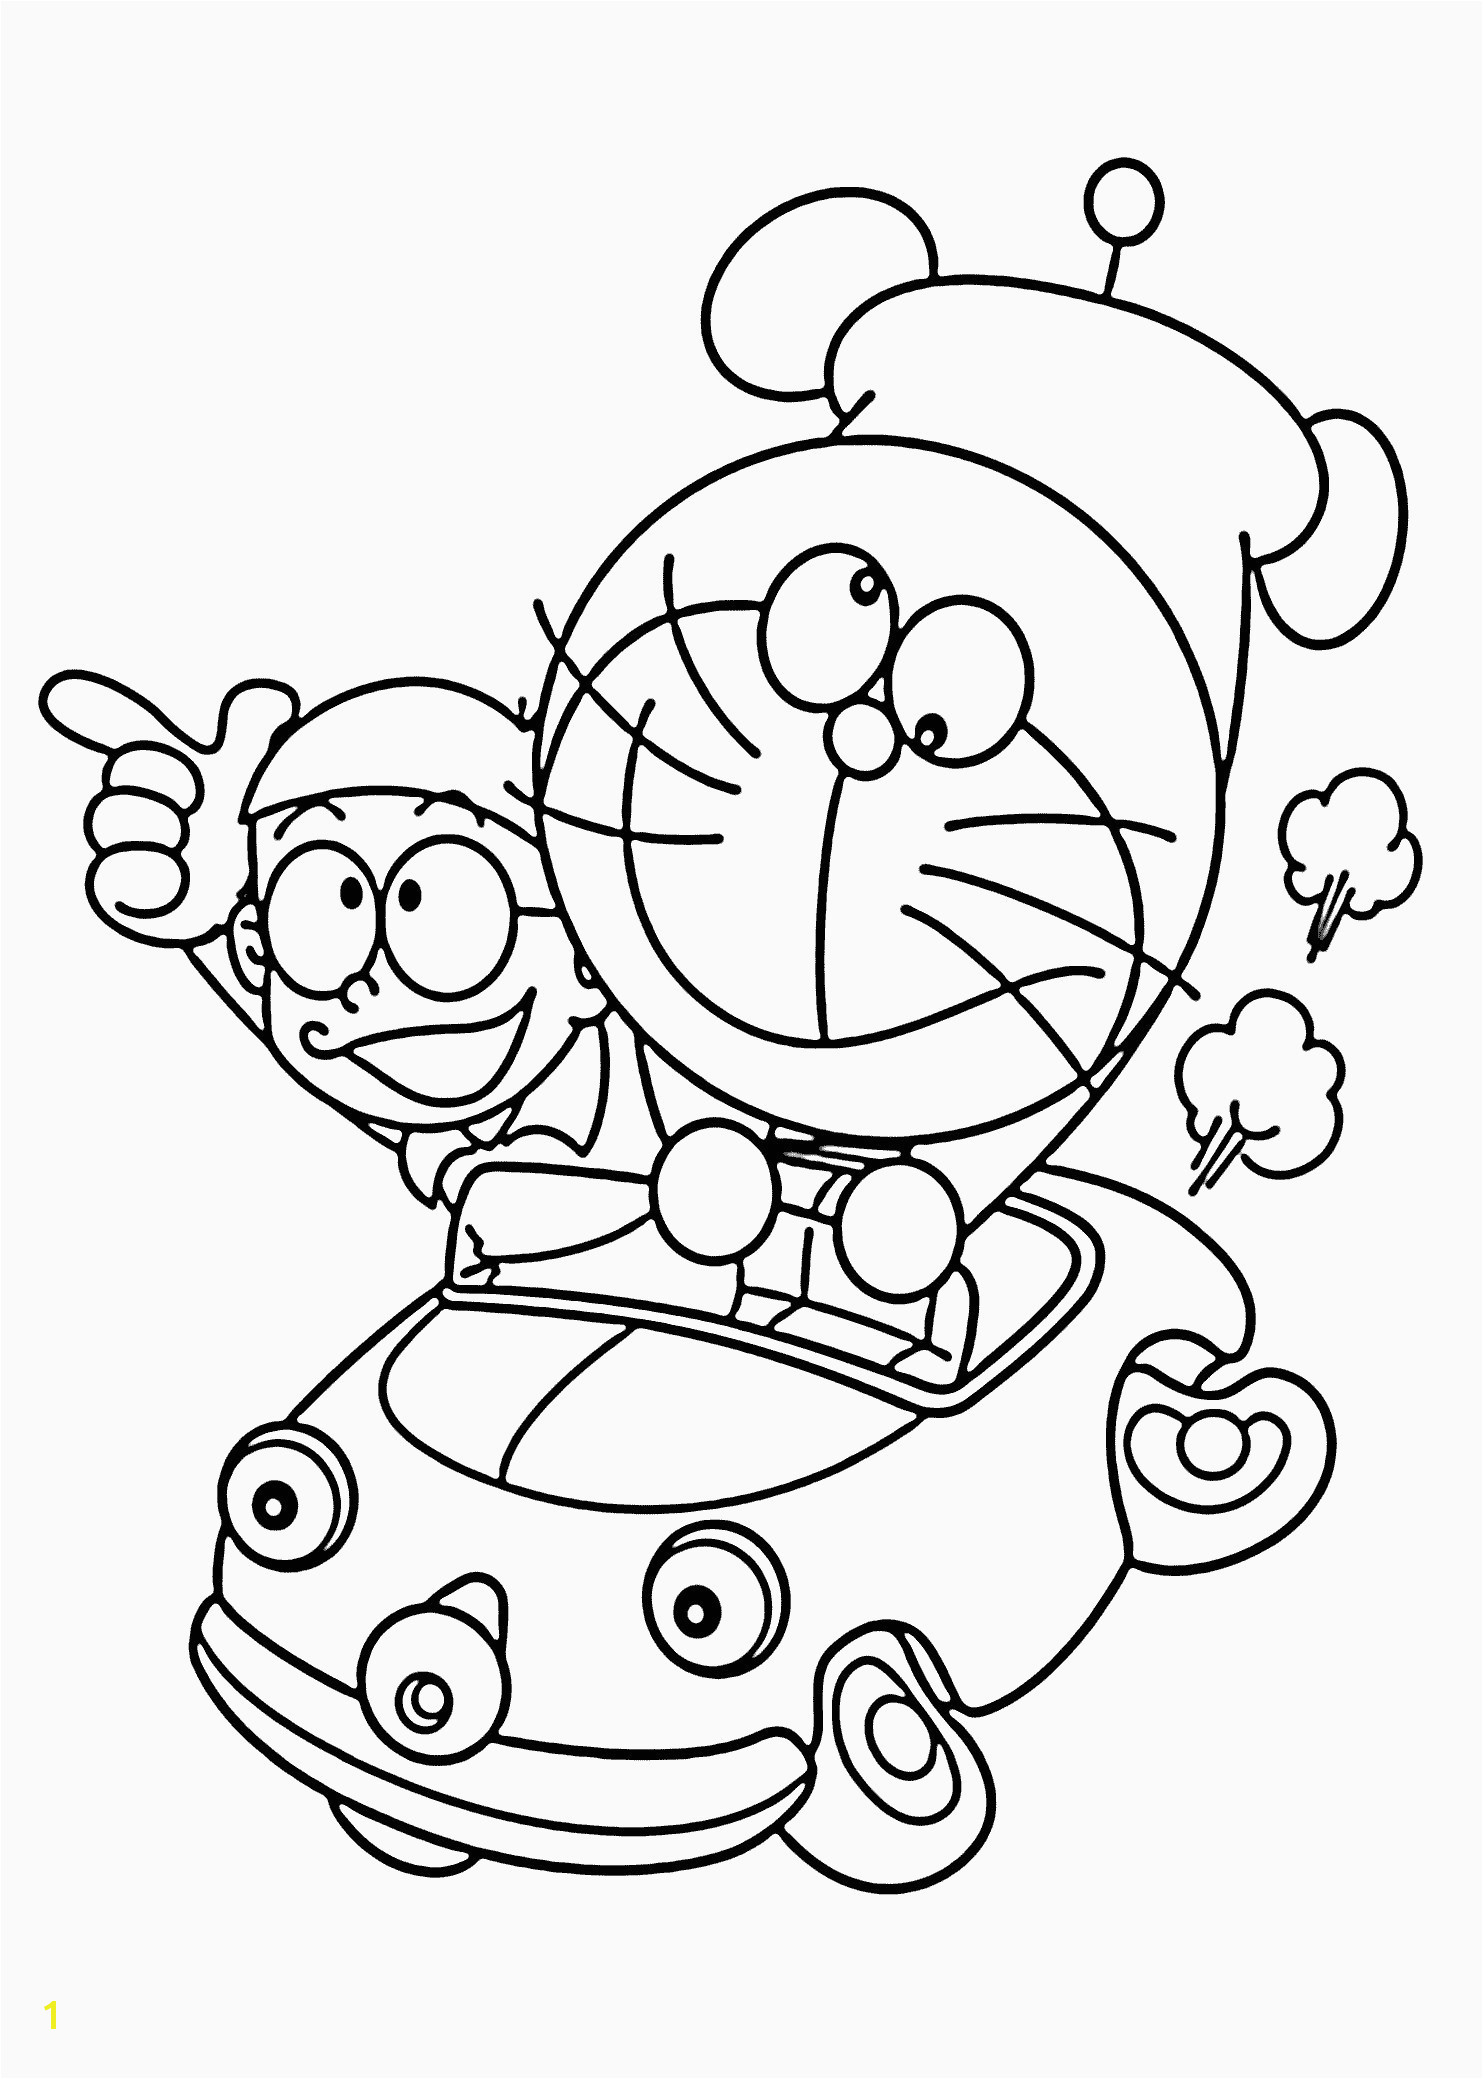 Cuties Coloring Pages Basketball Coloring Page Elegant Cuties Coloring Pages Home Coloring Pages Best Color